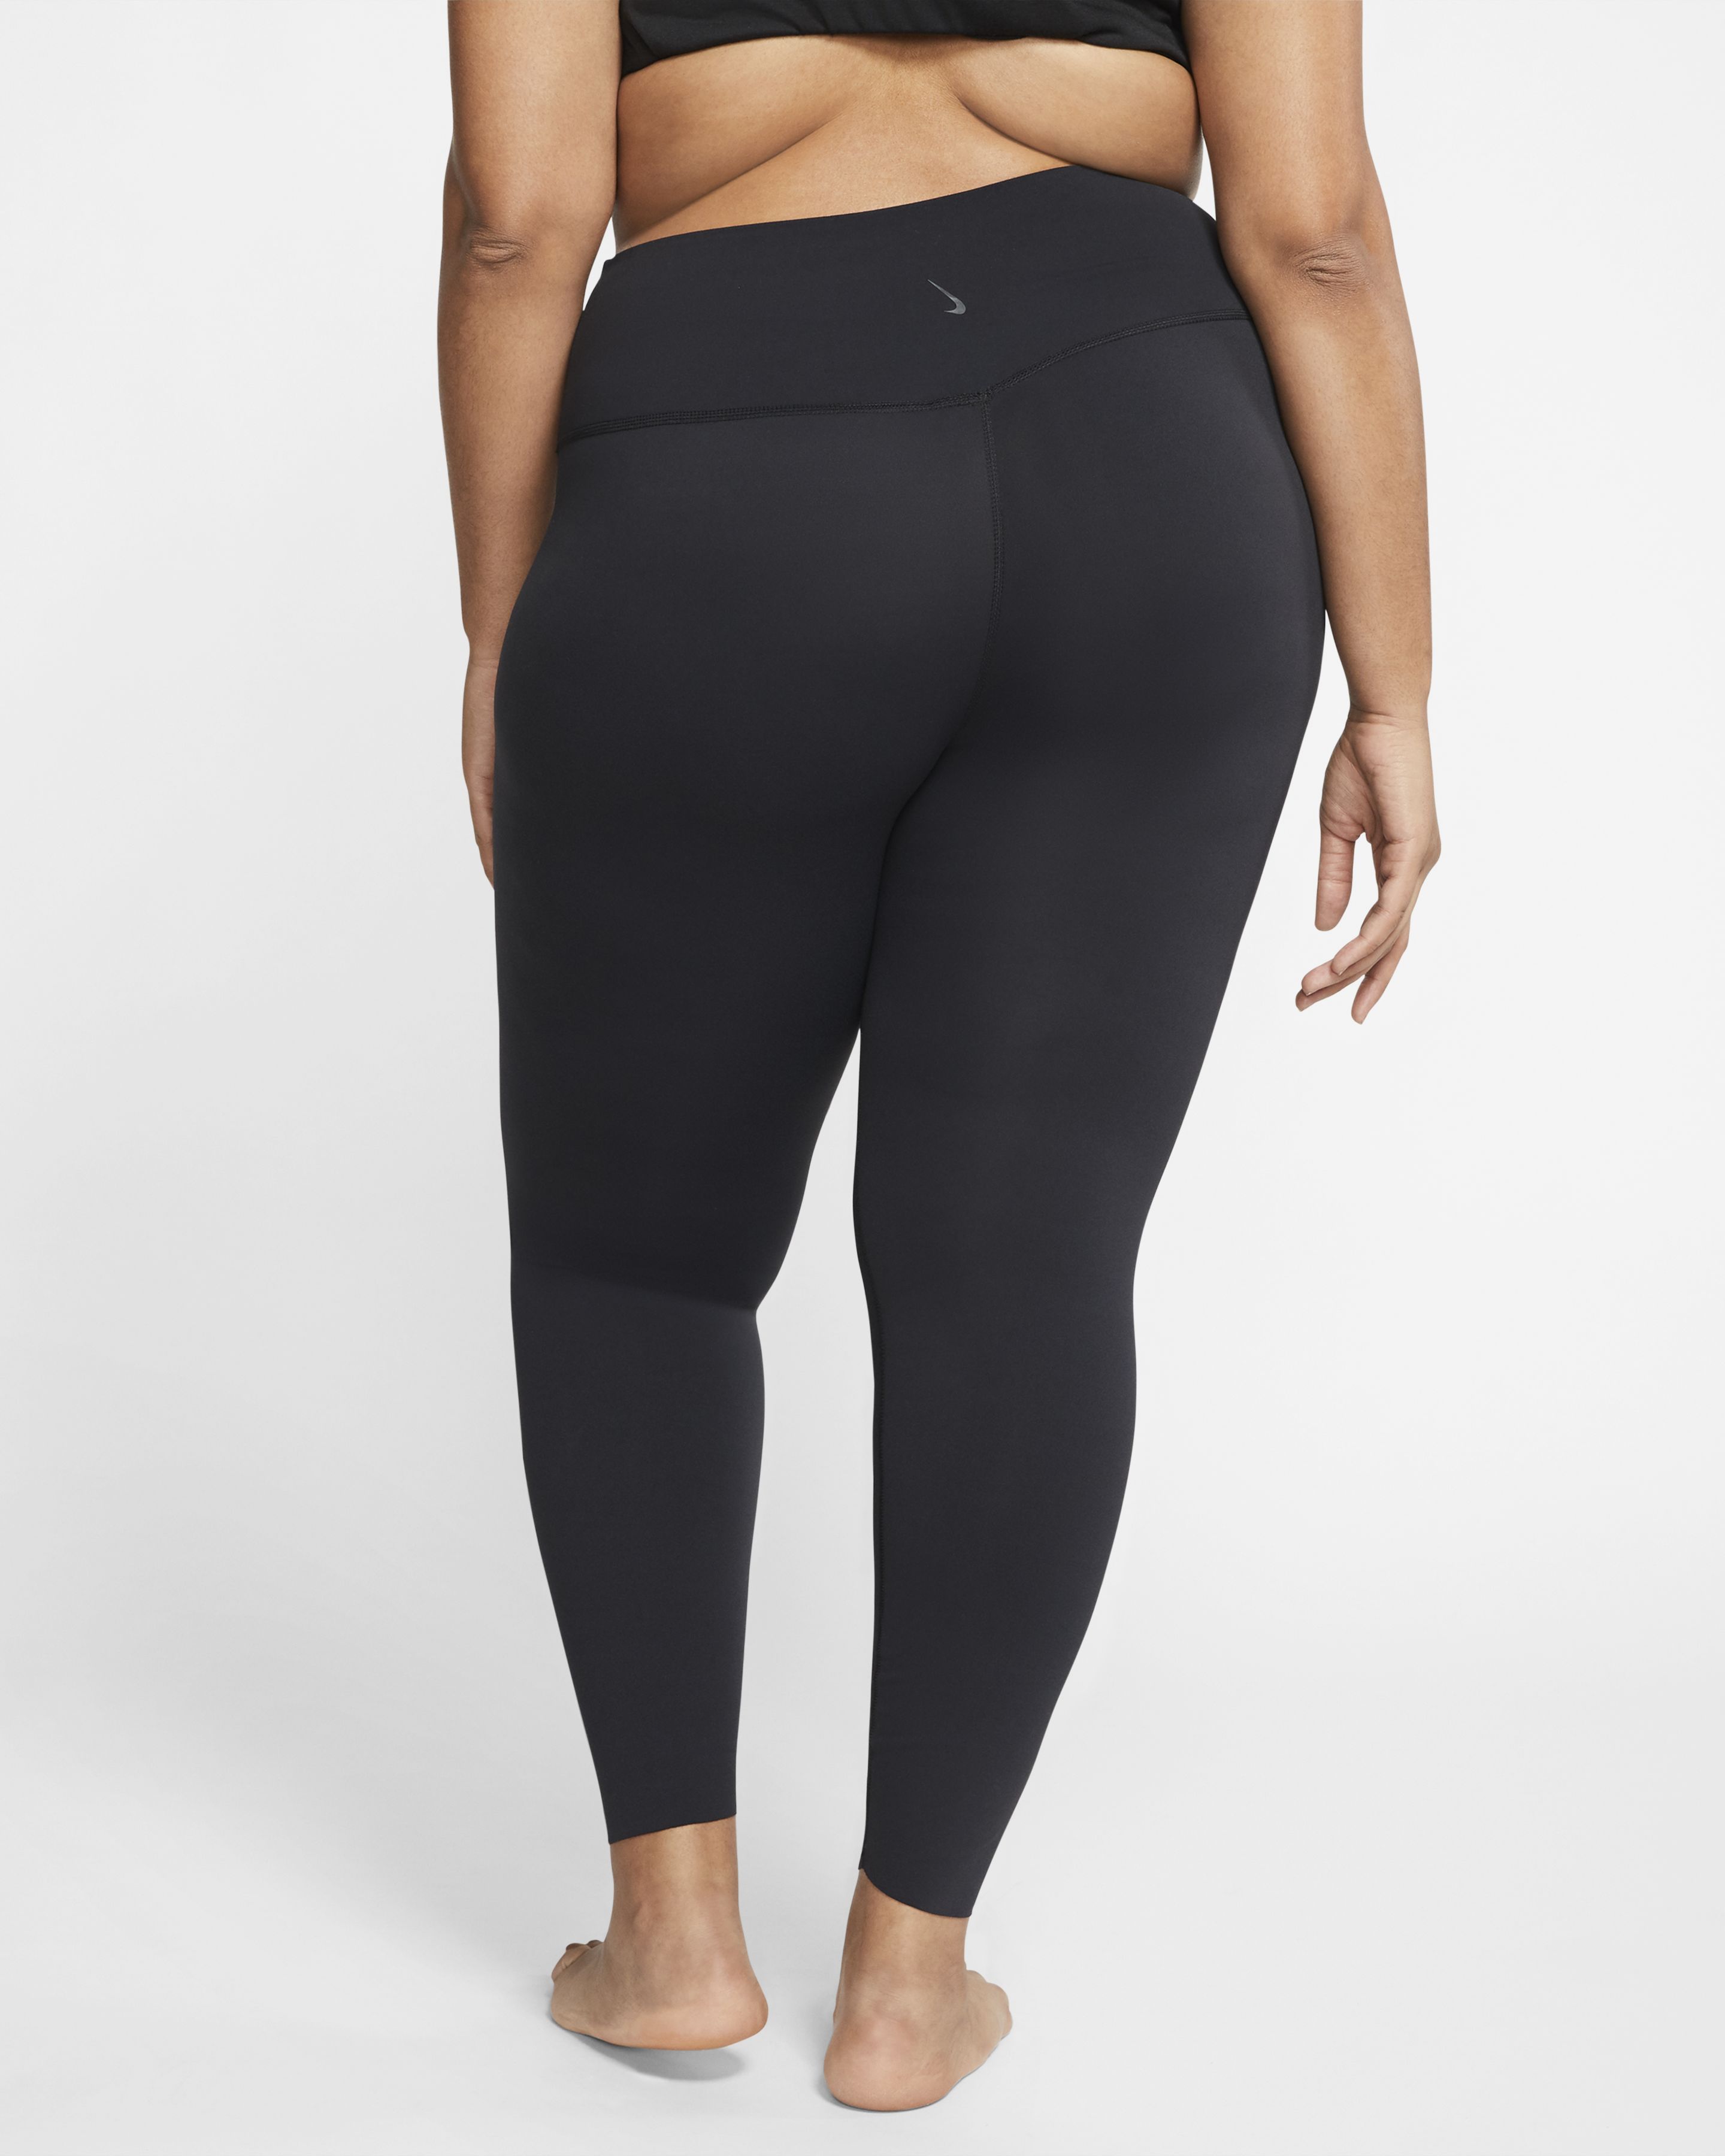 My Absolute Favorite PlusSize Leggings  The Everygirl